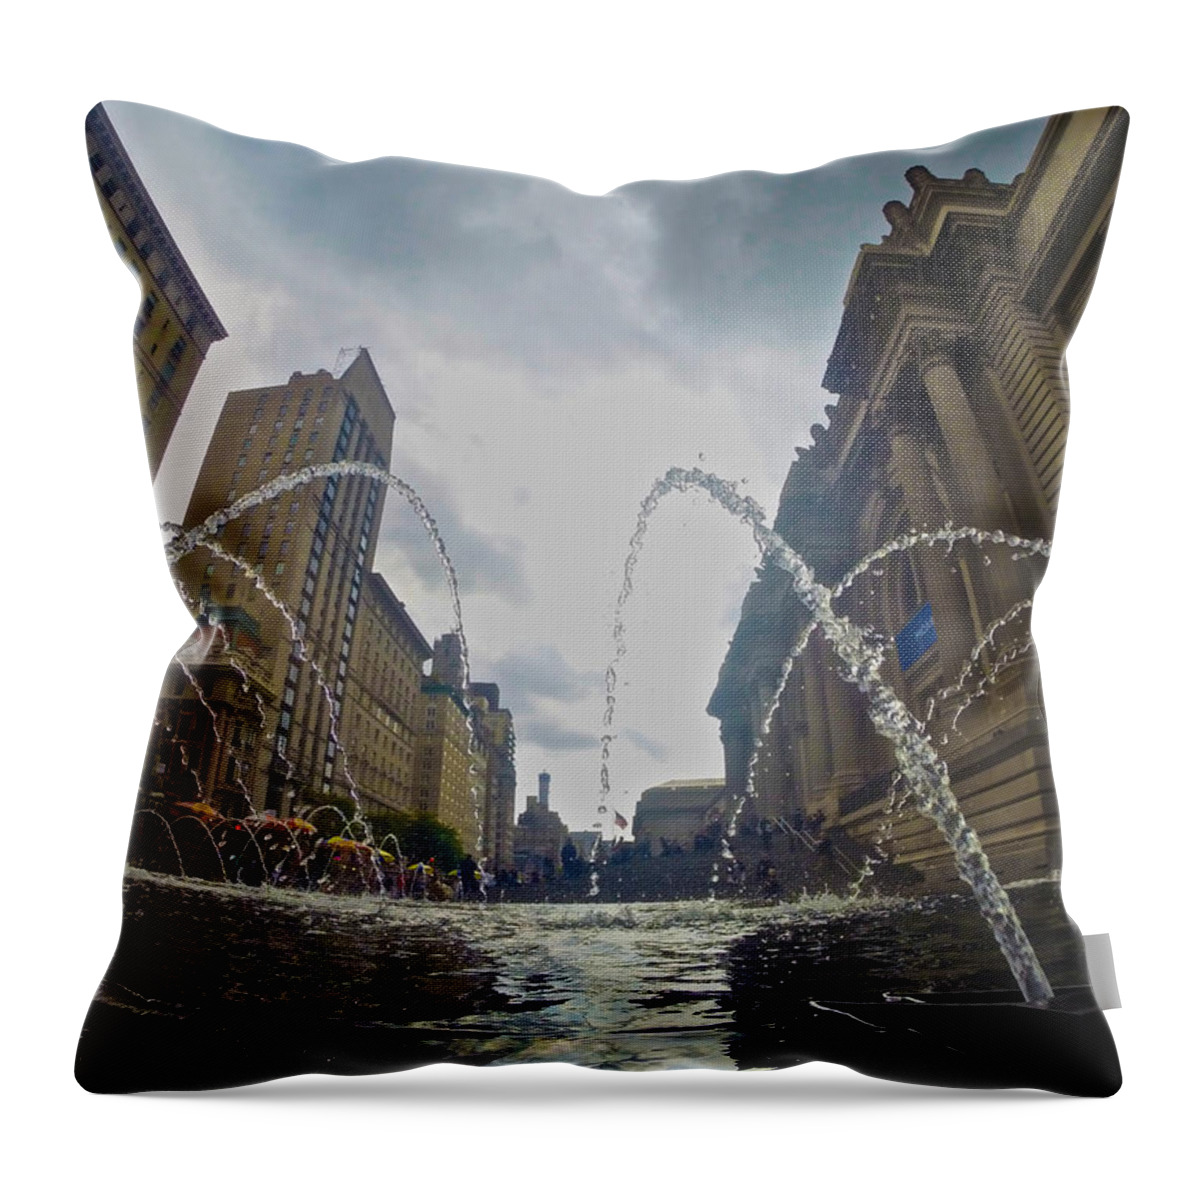 City Throw Pillow featuring the photograph Met Museum Fountains by Steven Lapkin